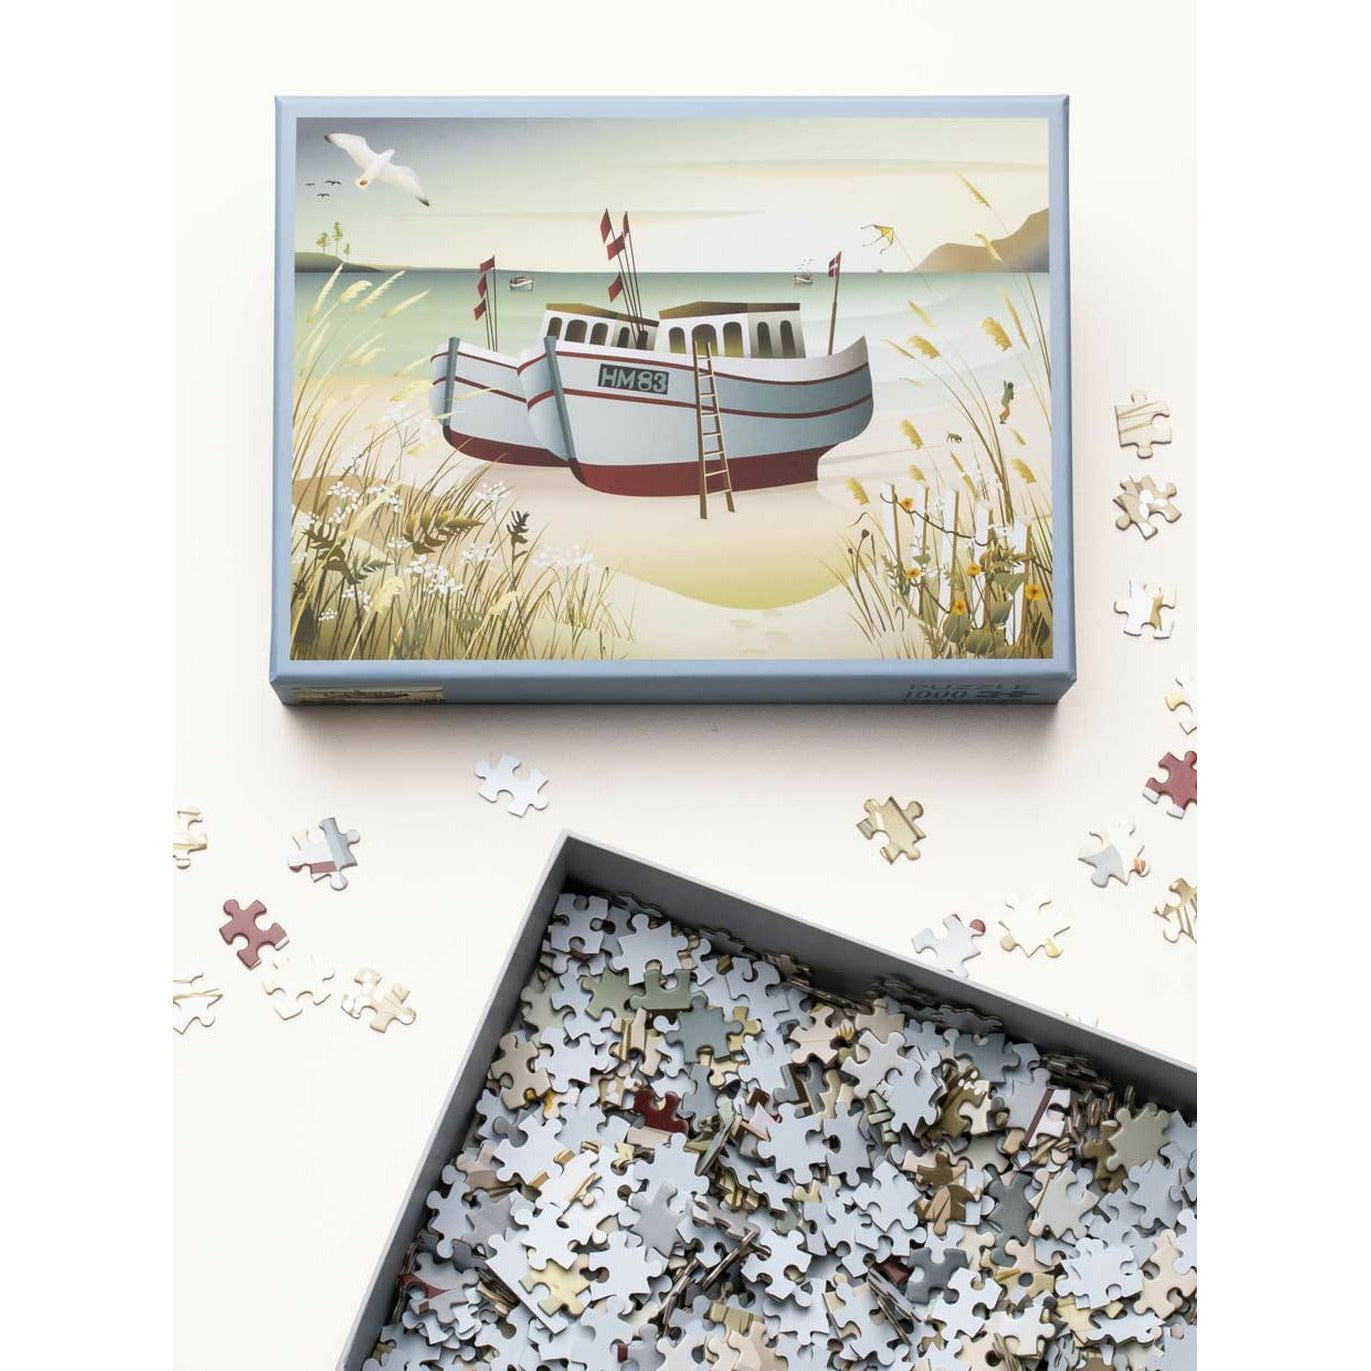 Vissevasse Fishing Boats Puzzle With 1000 Pieces